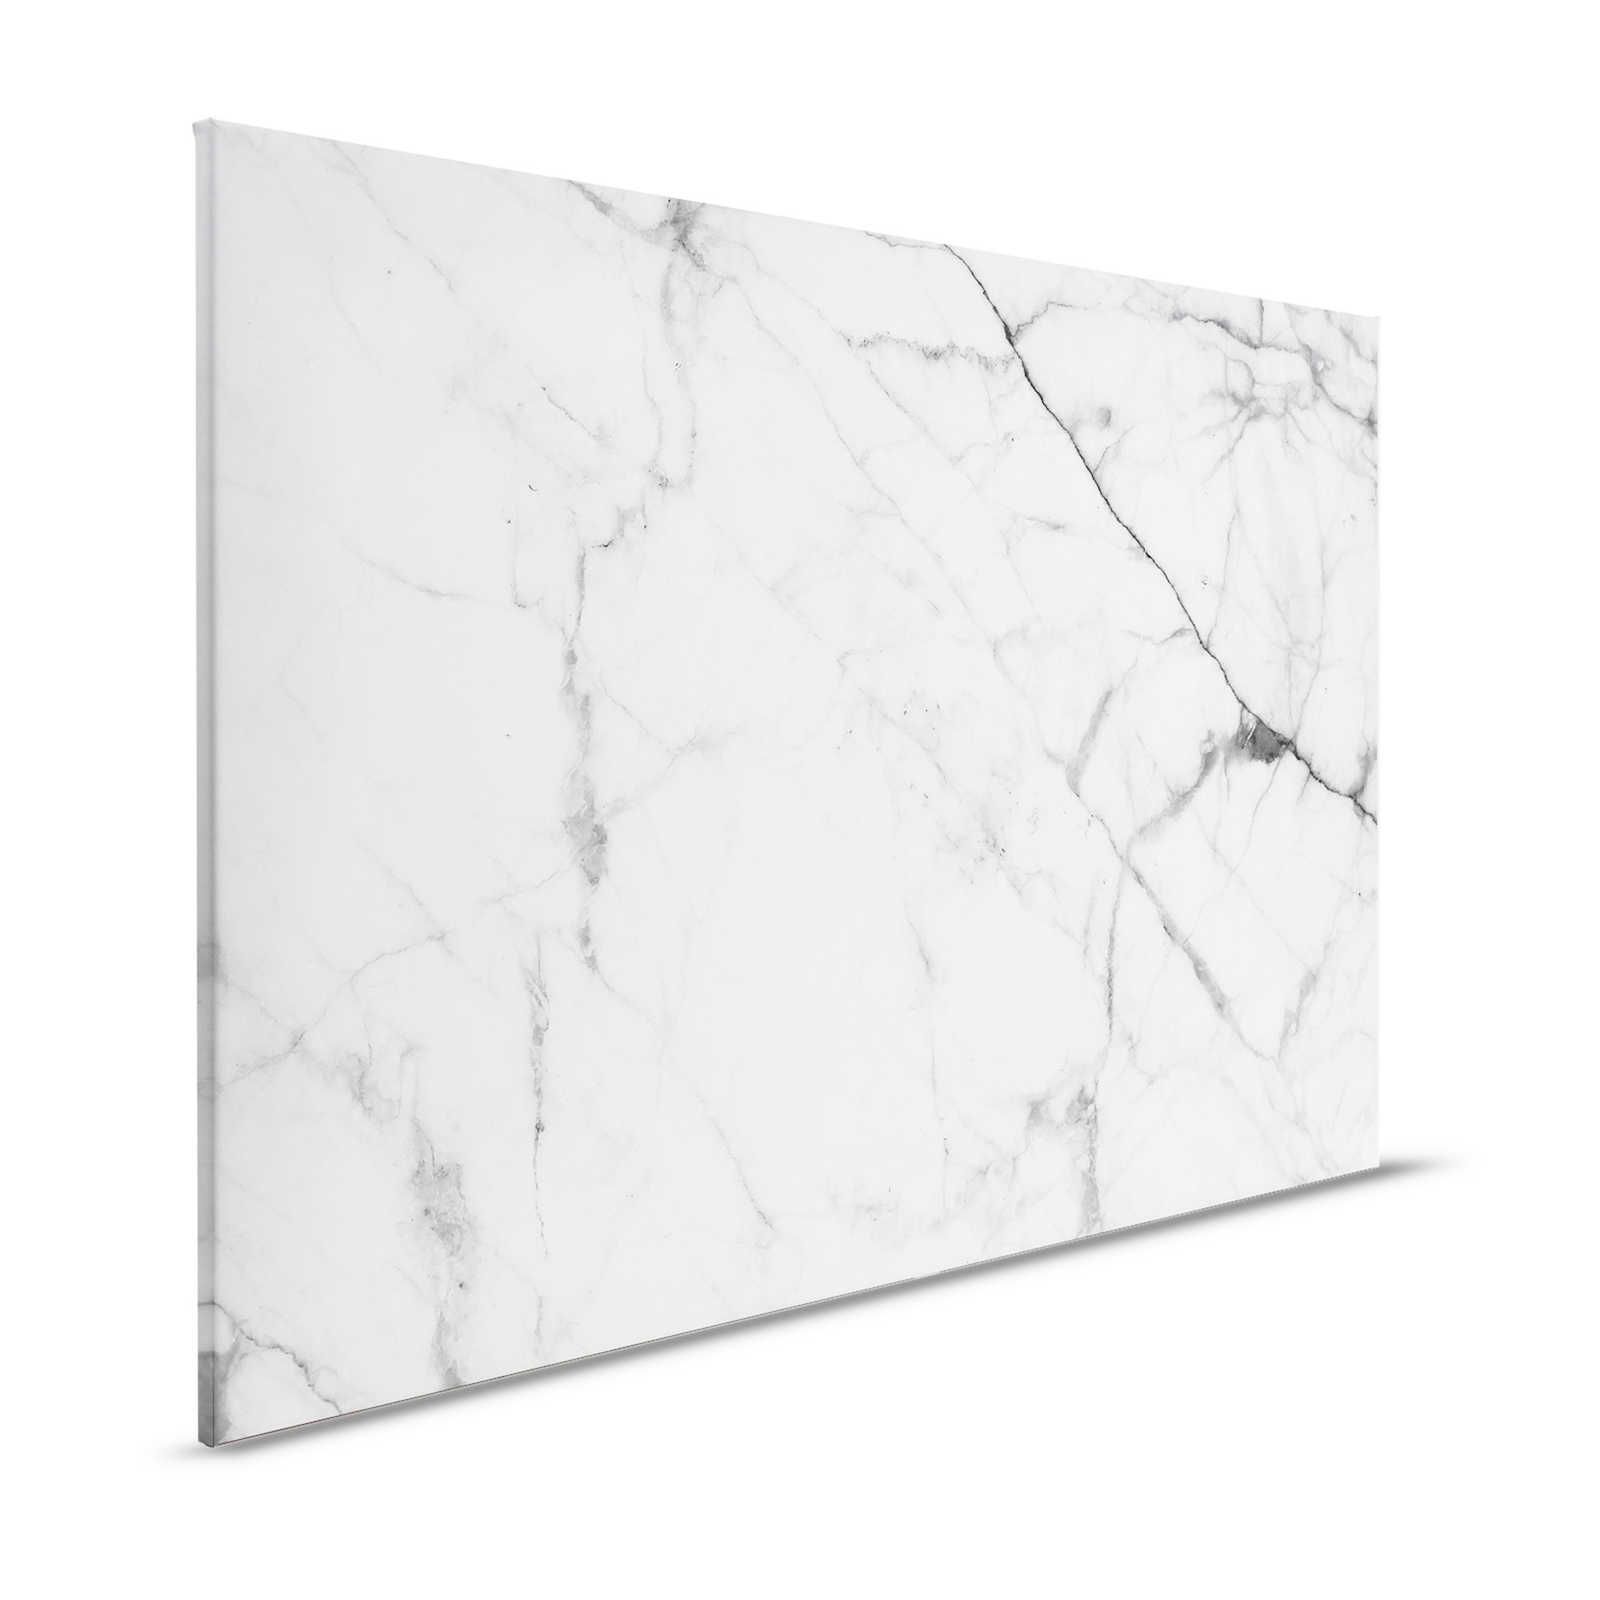 Black and White Canvas Painting Marble with Nature Details - 1.20 m x 0.80 m
